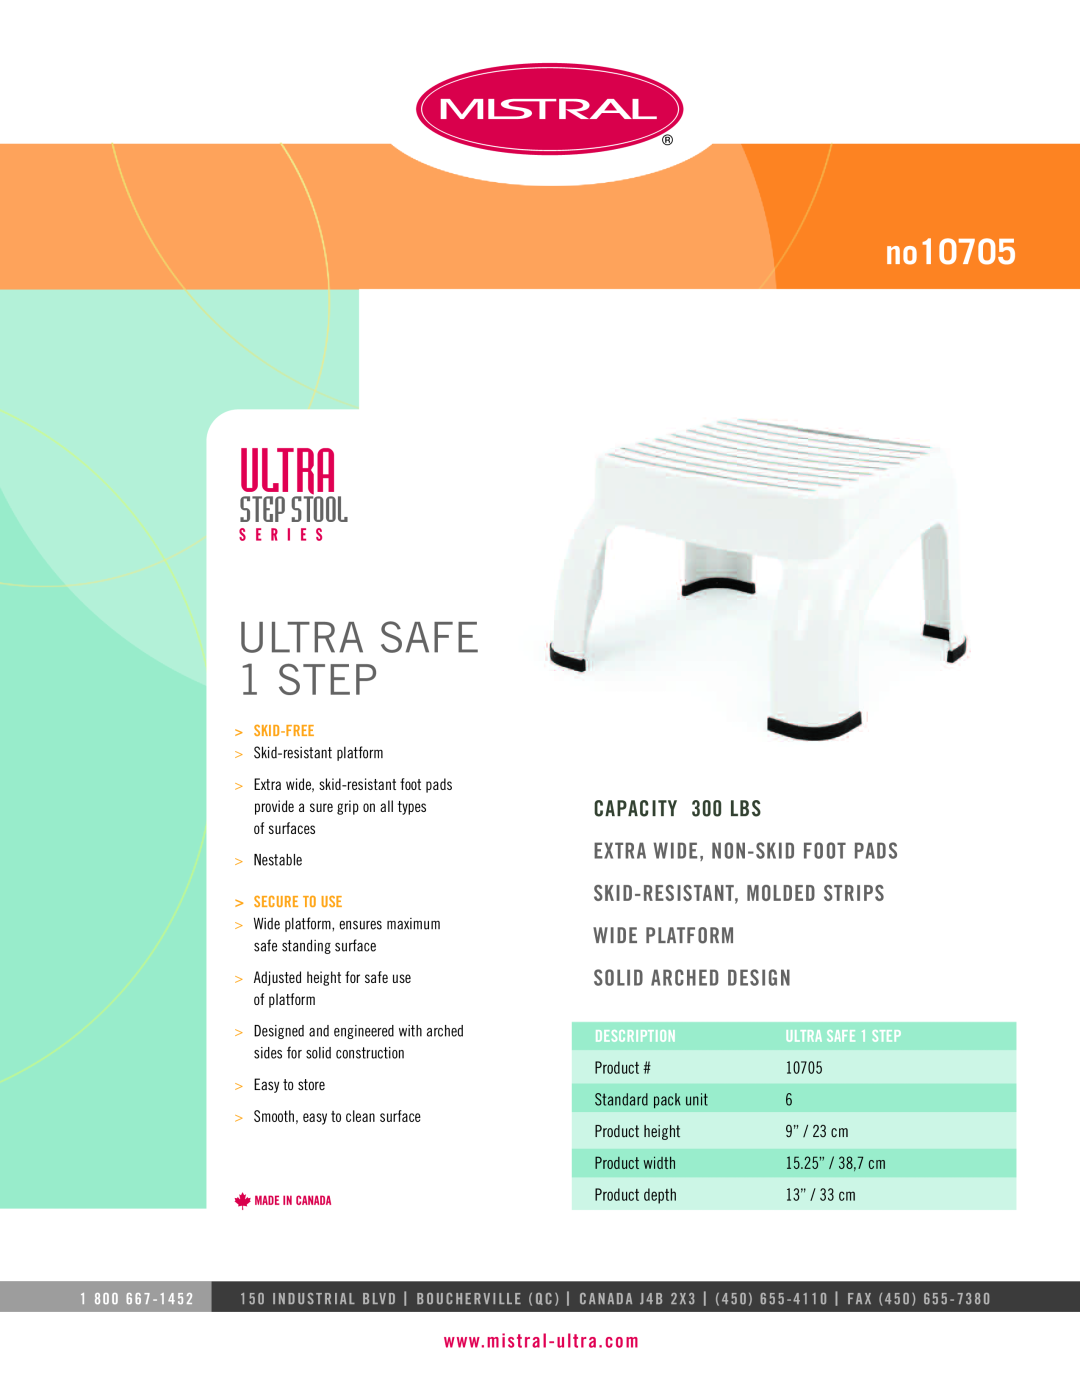 Mistral manual Ultra, ULTRA SAFE 1STEP, Step Stool, no10705, CAPACITY 300 LBS, Extra Wide, Non-Skidfoot Pads 